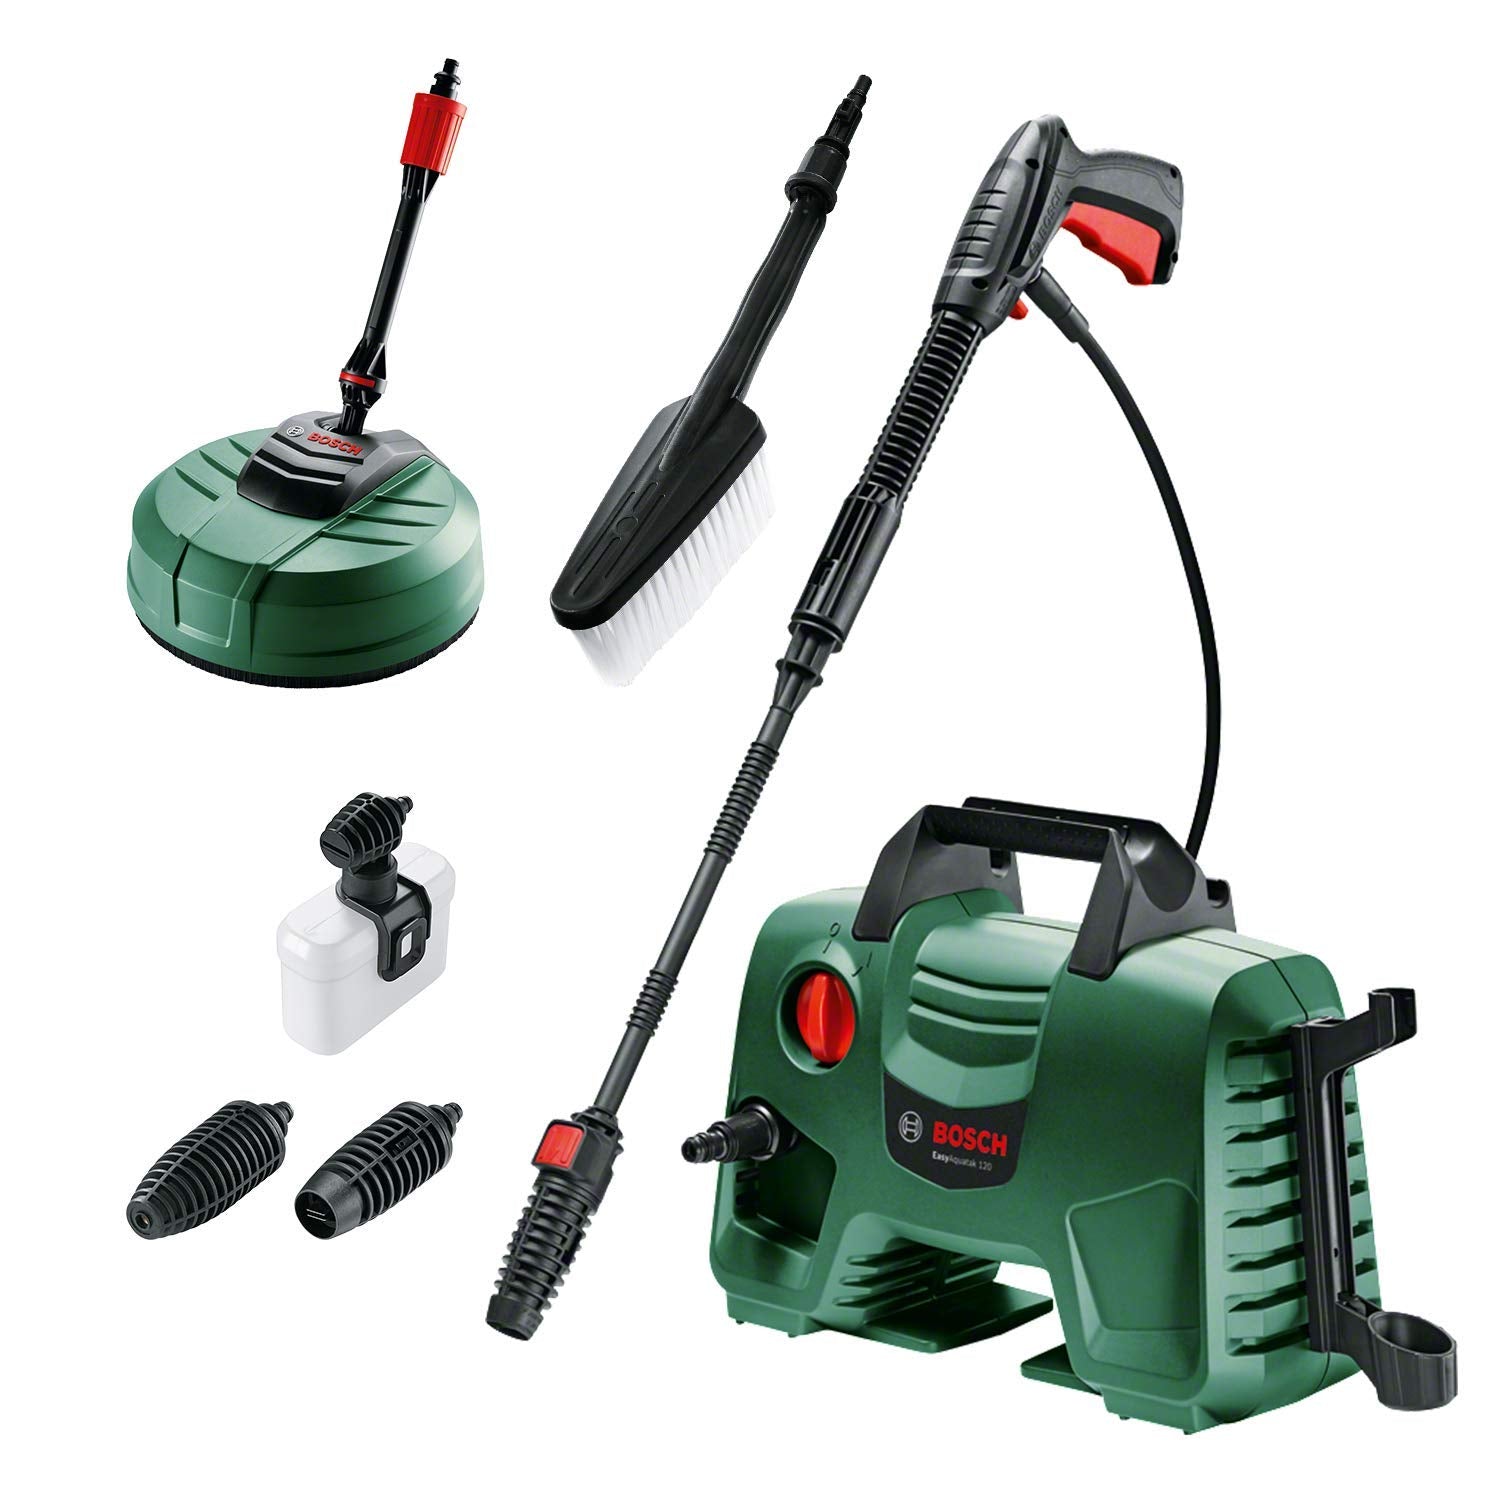 New BOSCH Home and Garden Products